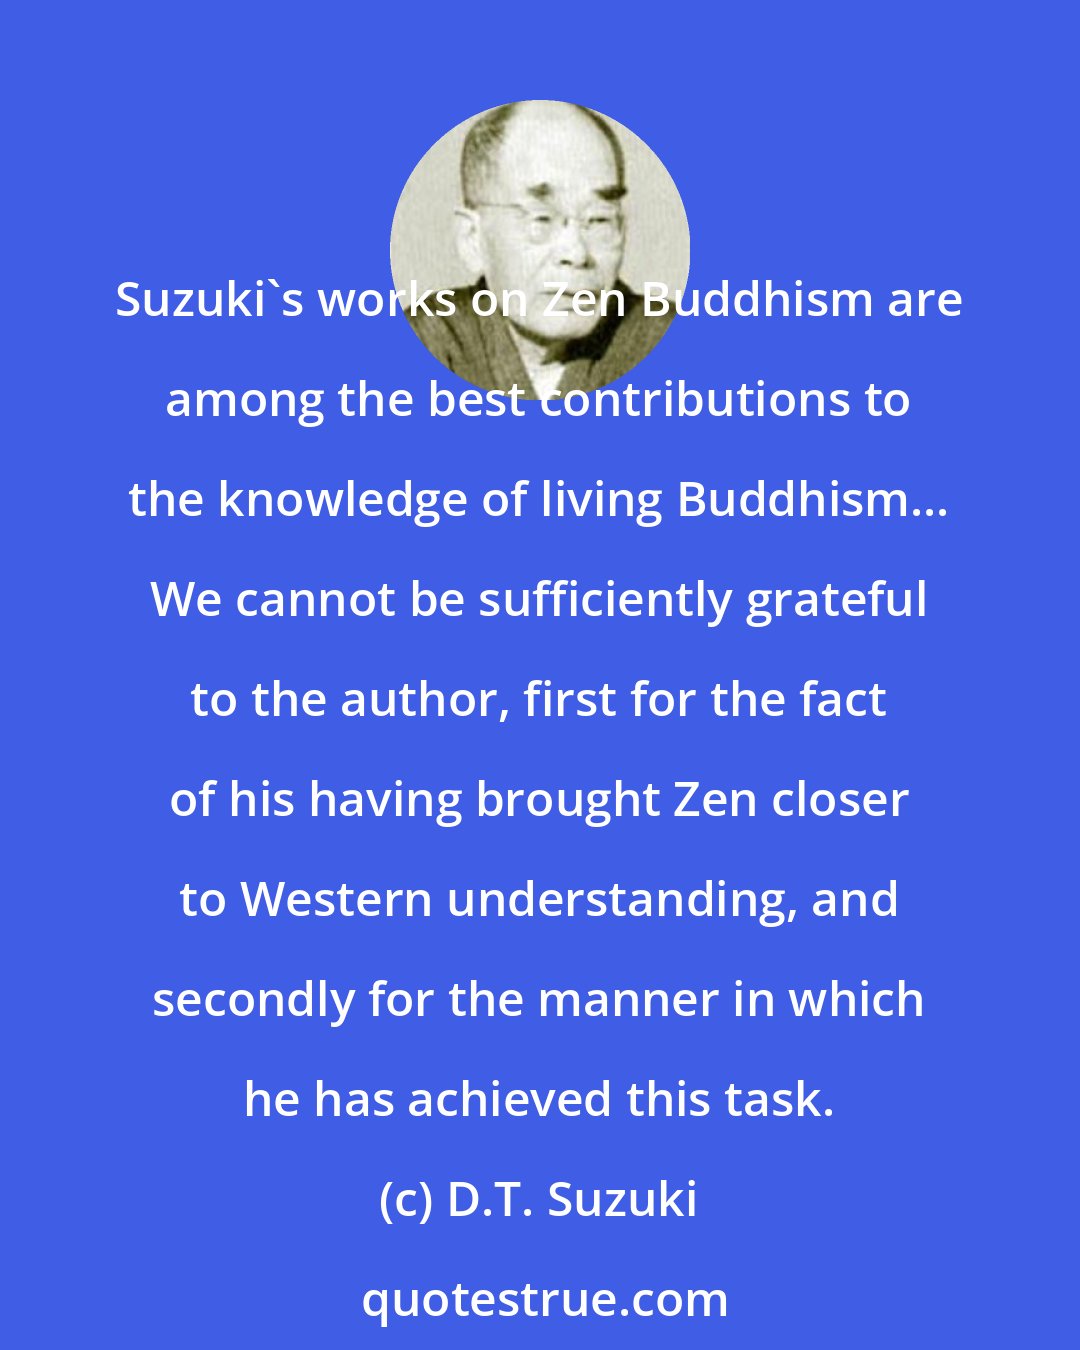 D.T. Suzuki: Suzuki's works on Zen Buddhism are among the best contributions to the knowledge of living Buddhism... We cannot be sufficiently grateful to the author, first for the fact of his having brought Zen closer to Western understanding, and secondly for the manner in which he has achieved this task.